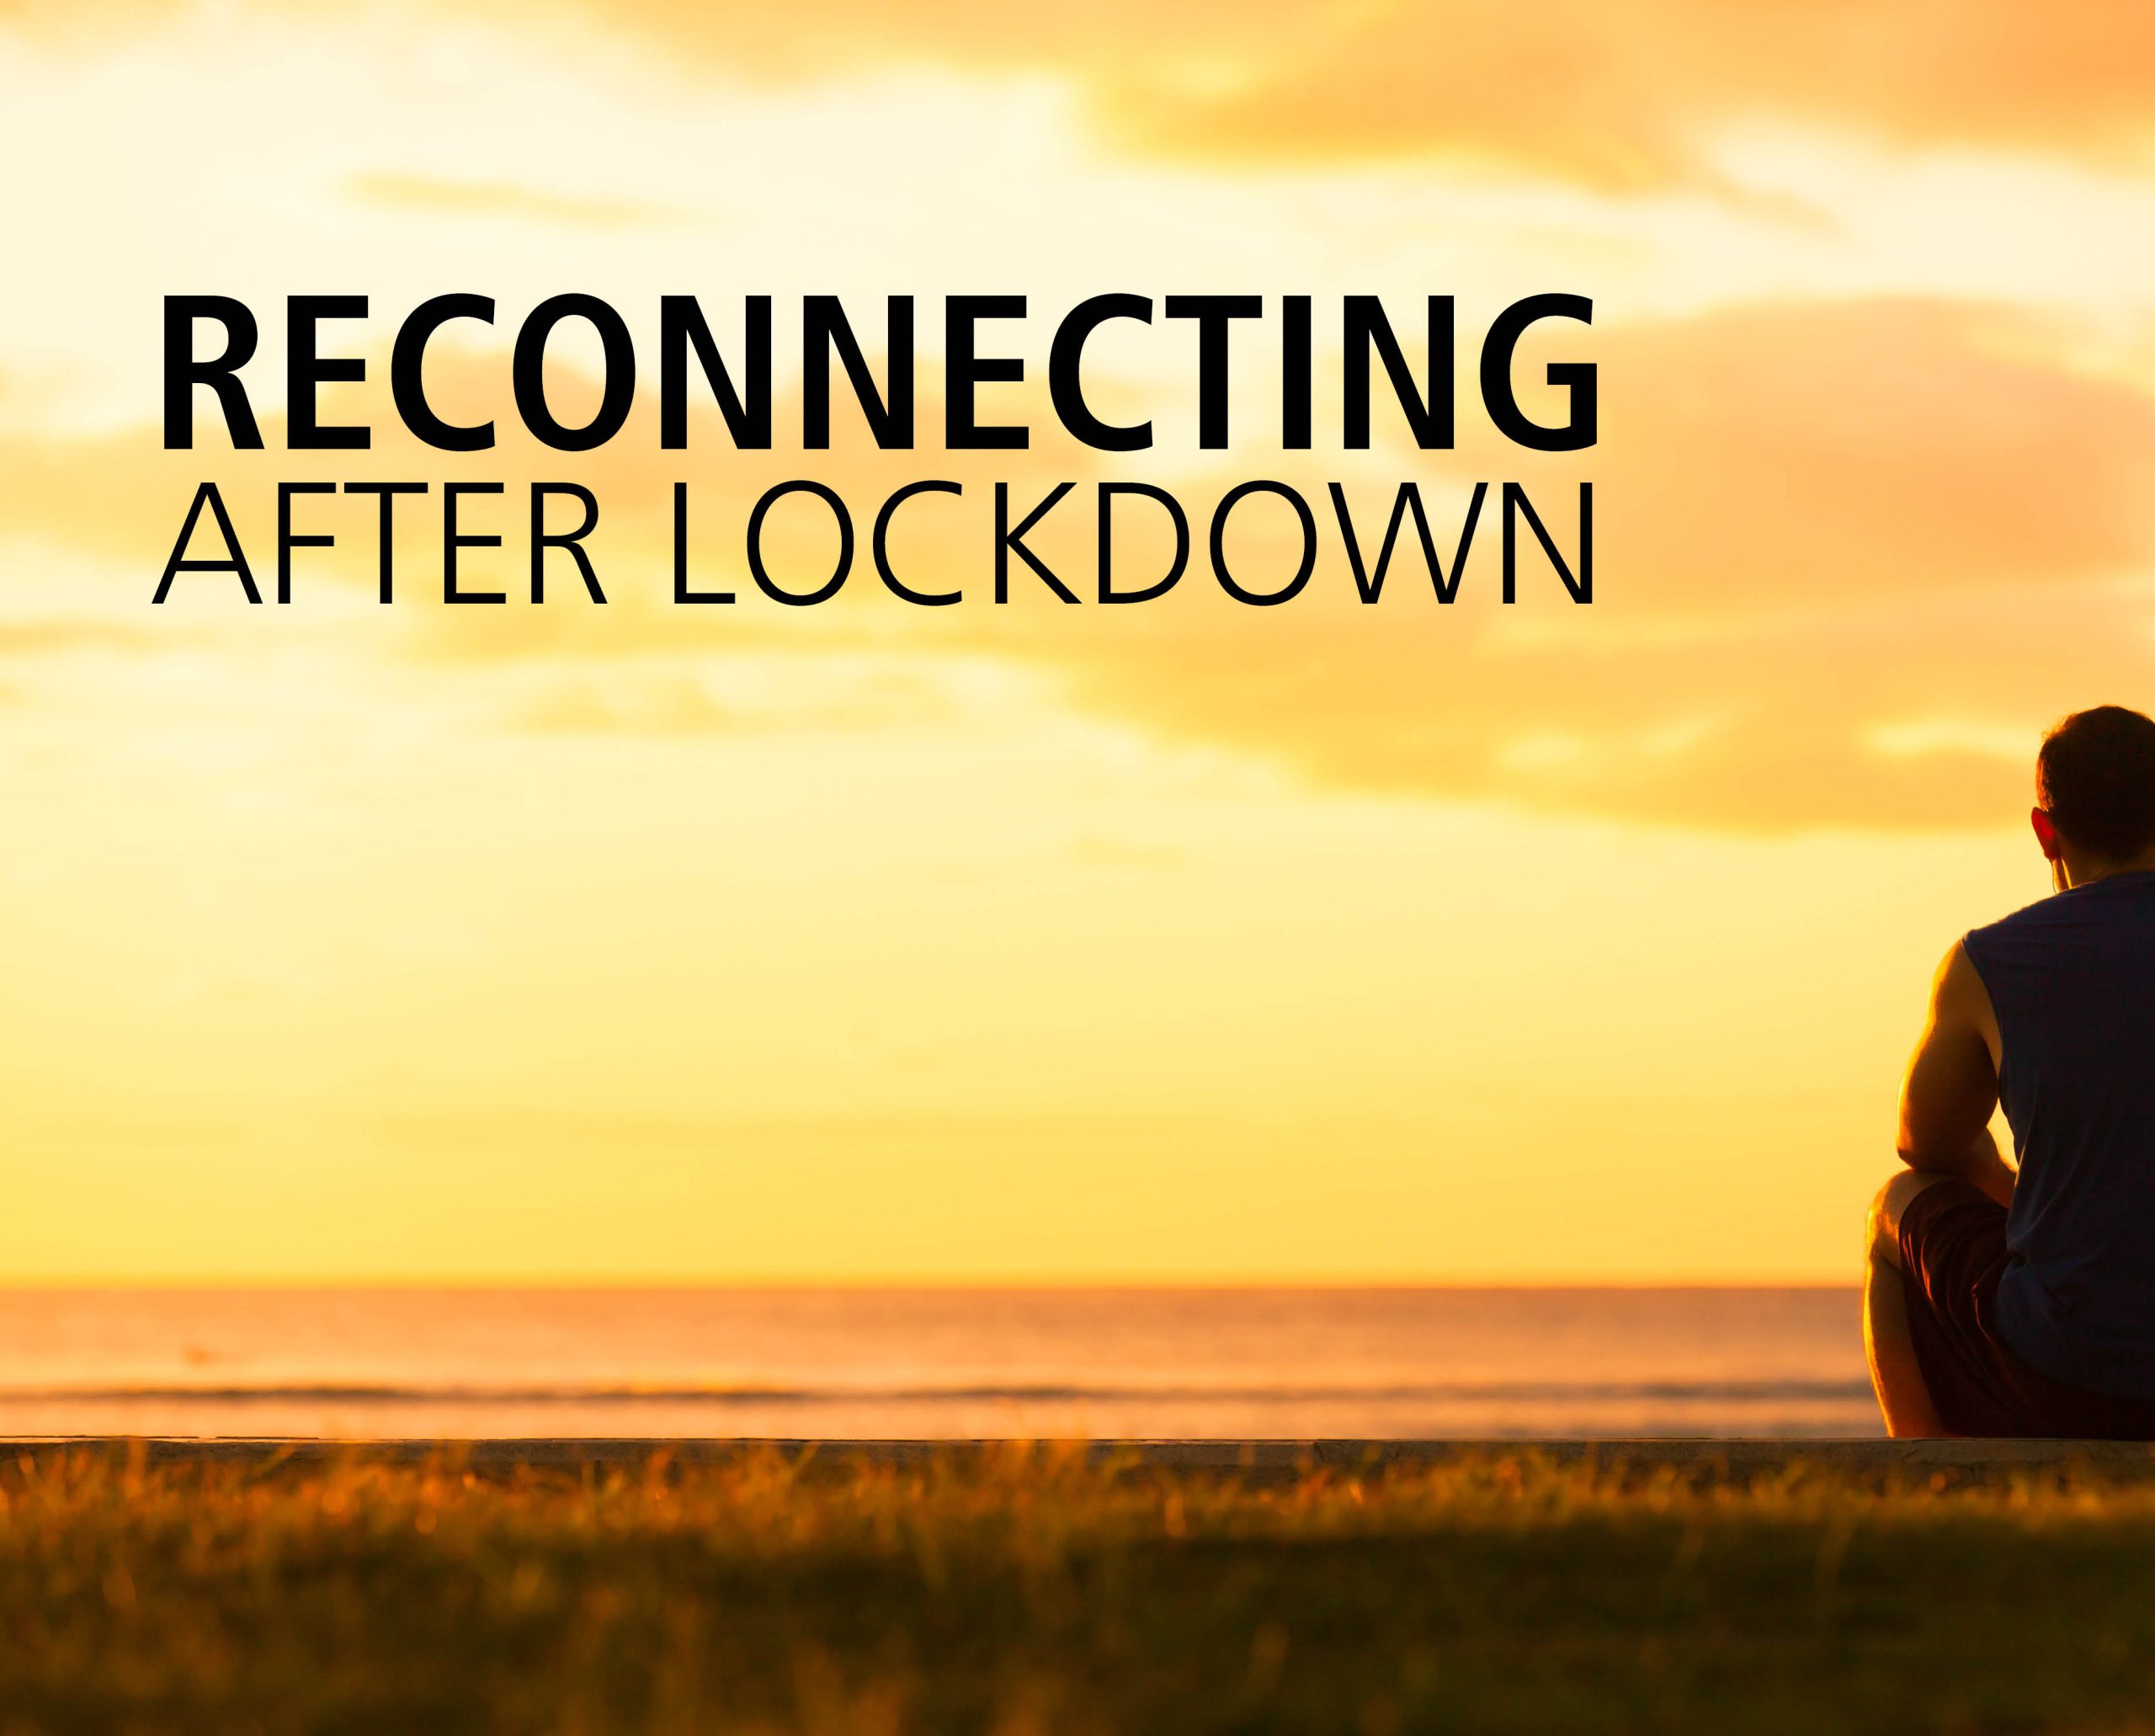 Reconnecting after lockdown